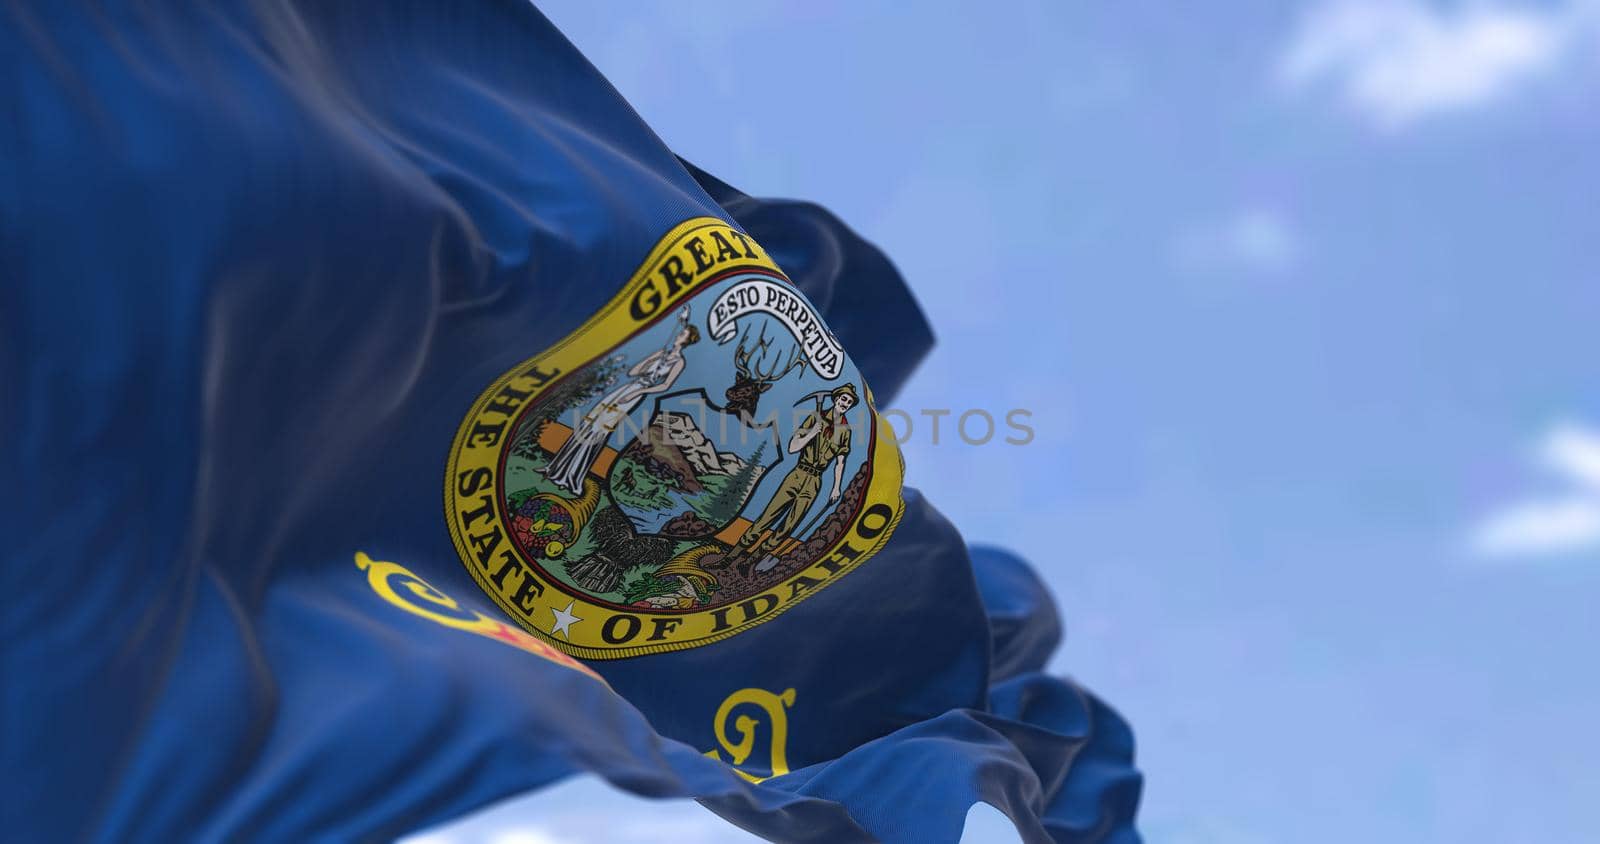 The US state flag of Idaho waving in the wind. by rarrarorro